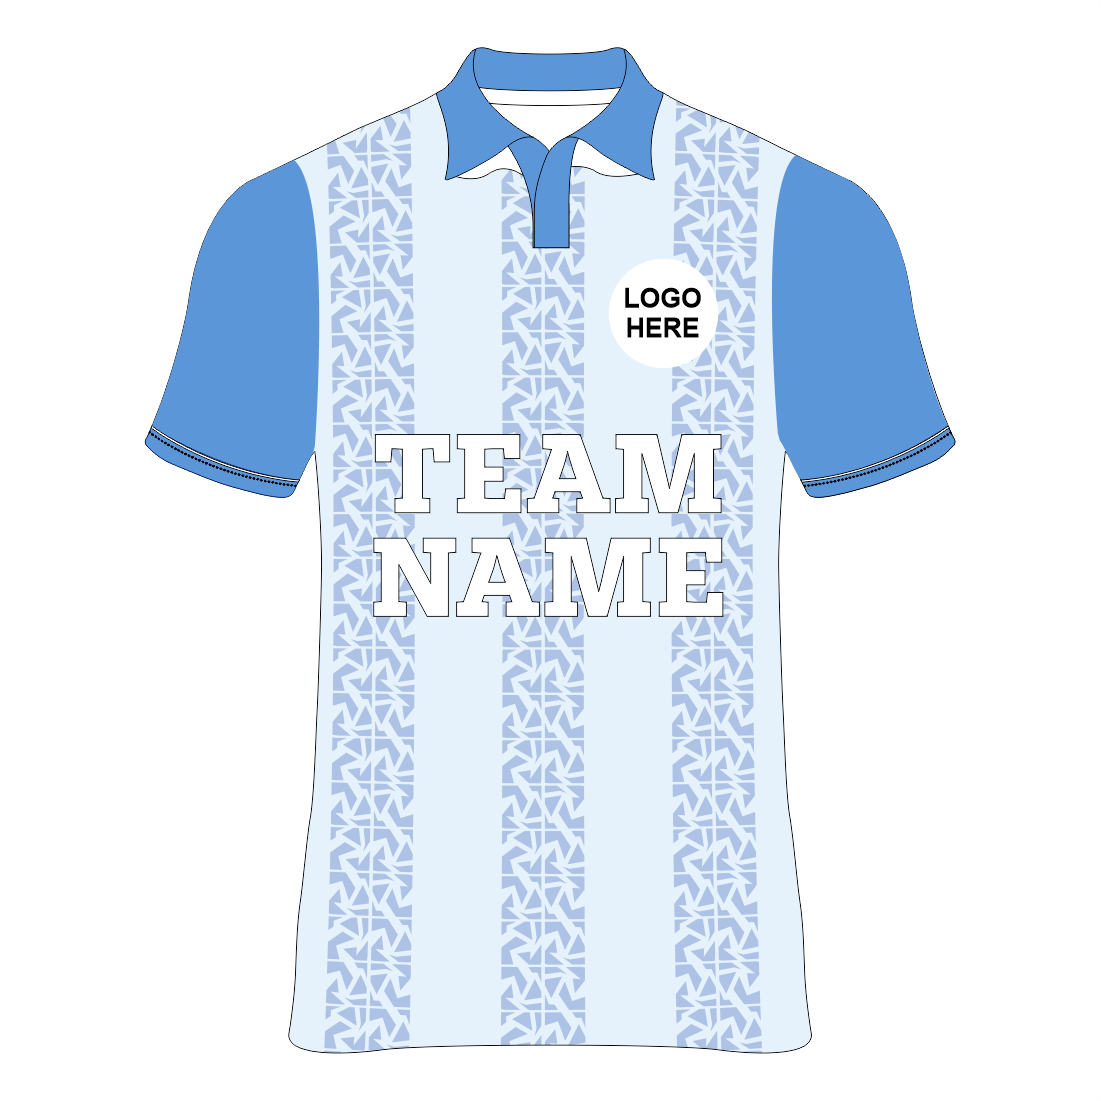 NEXT PRINT All Over Printed Customized Sublimation T-Shirt Unisex Sports Jersey Player Name & Number, Team Name And Logo.NP0080061